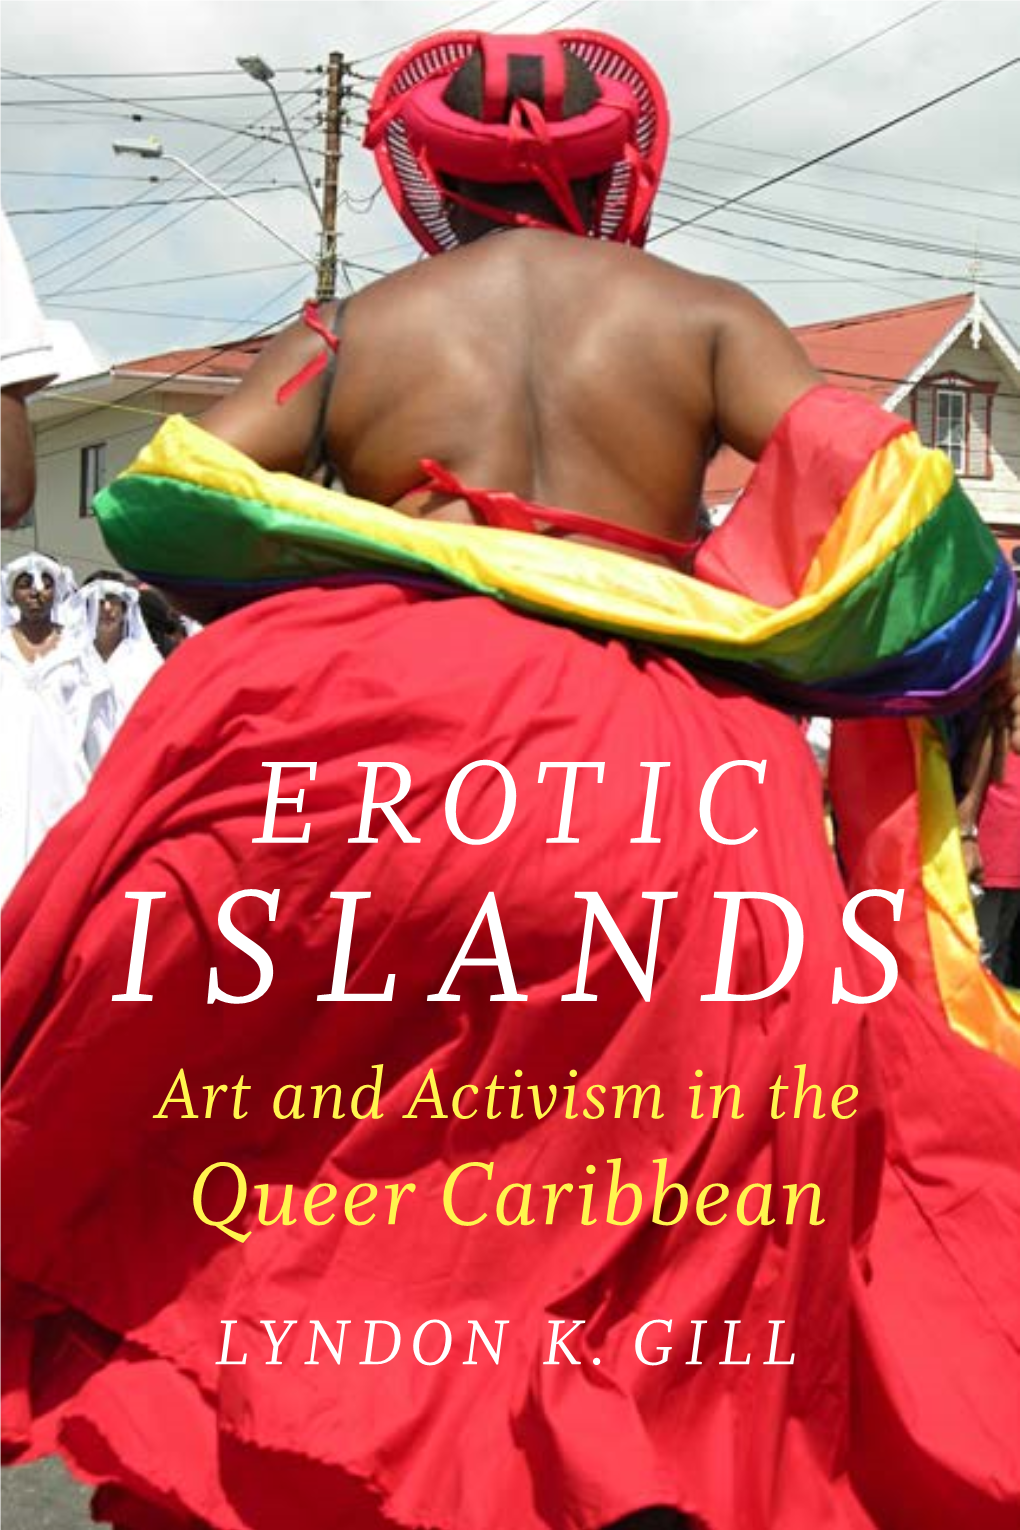 EROTIC ISLANDS Art and Activism in the Queer Caribbean LYNDON K